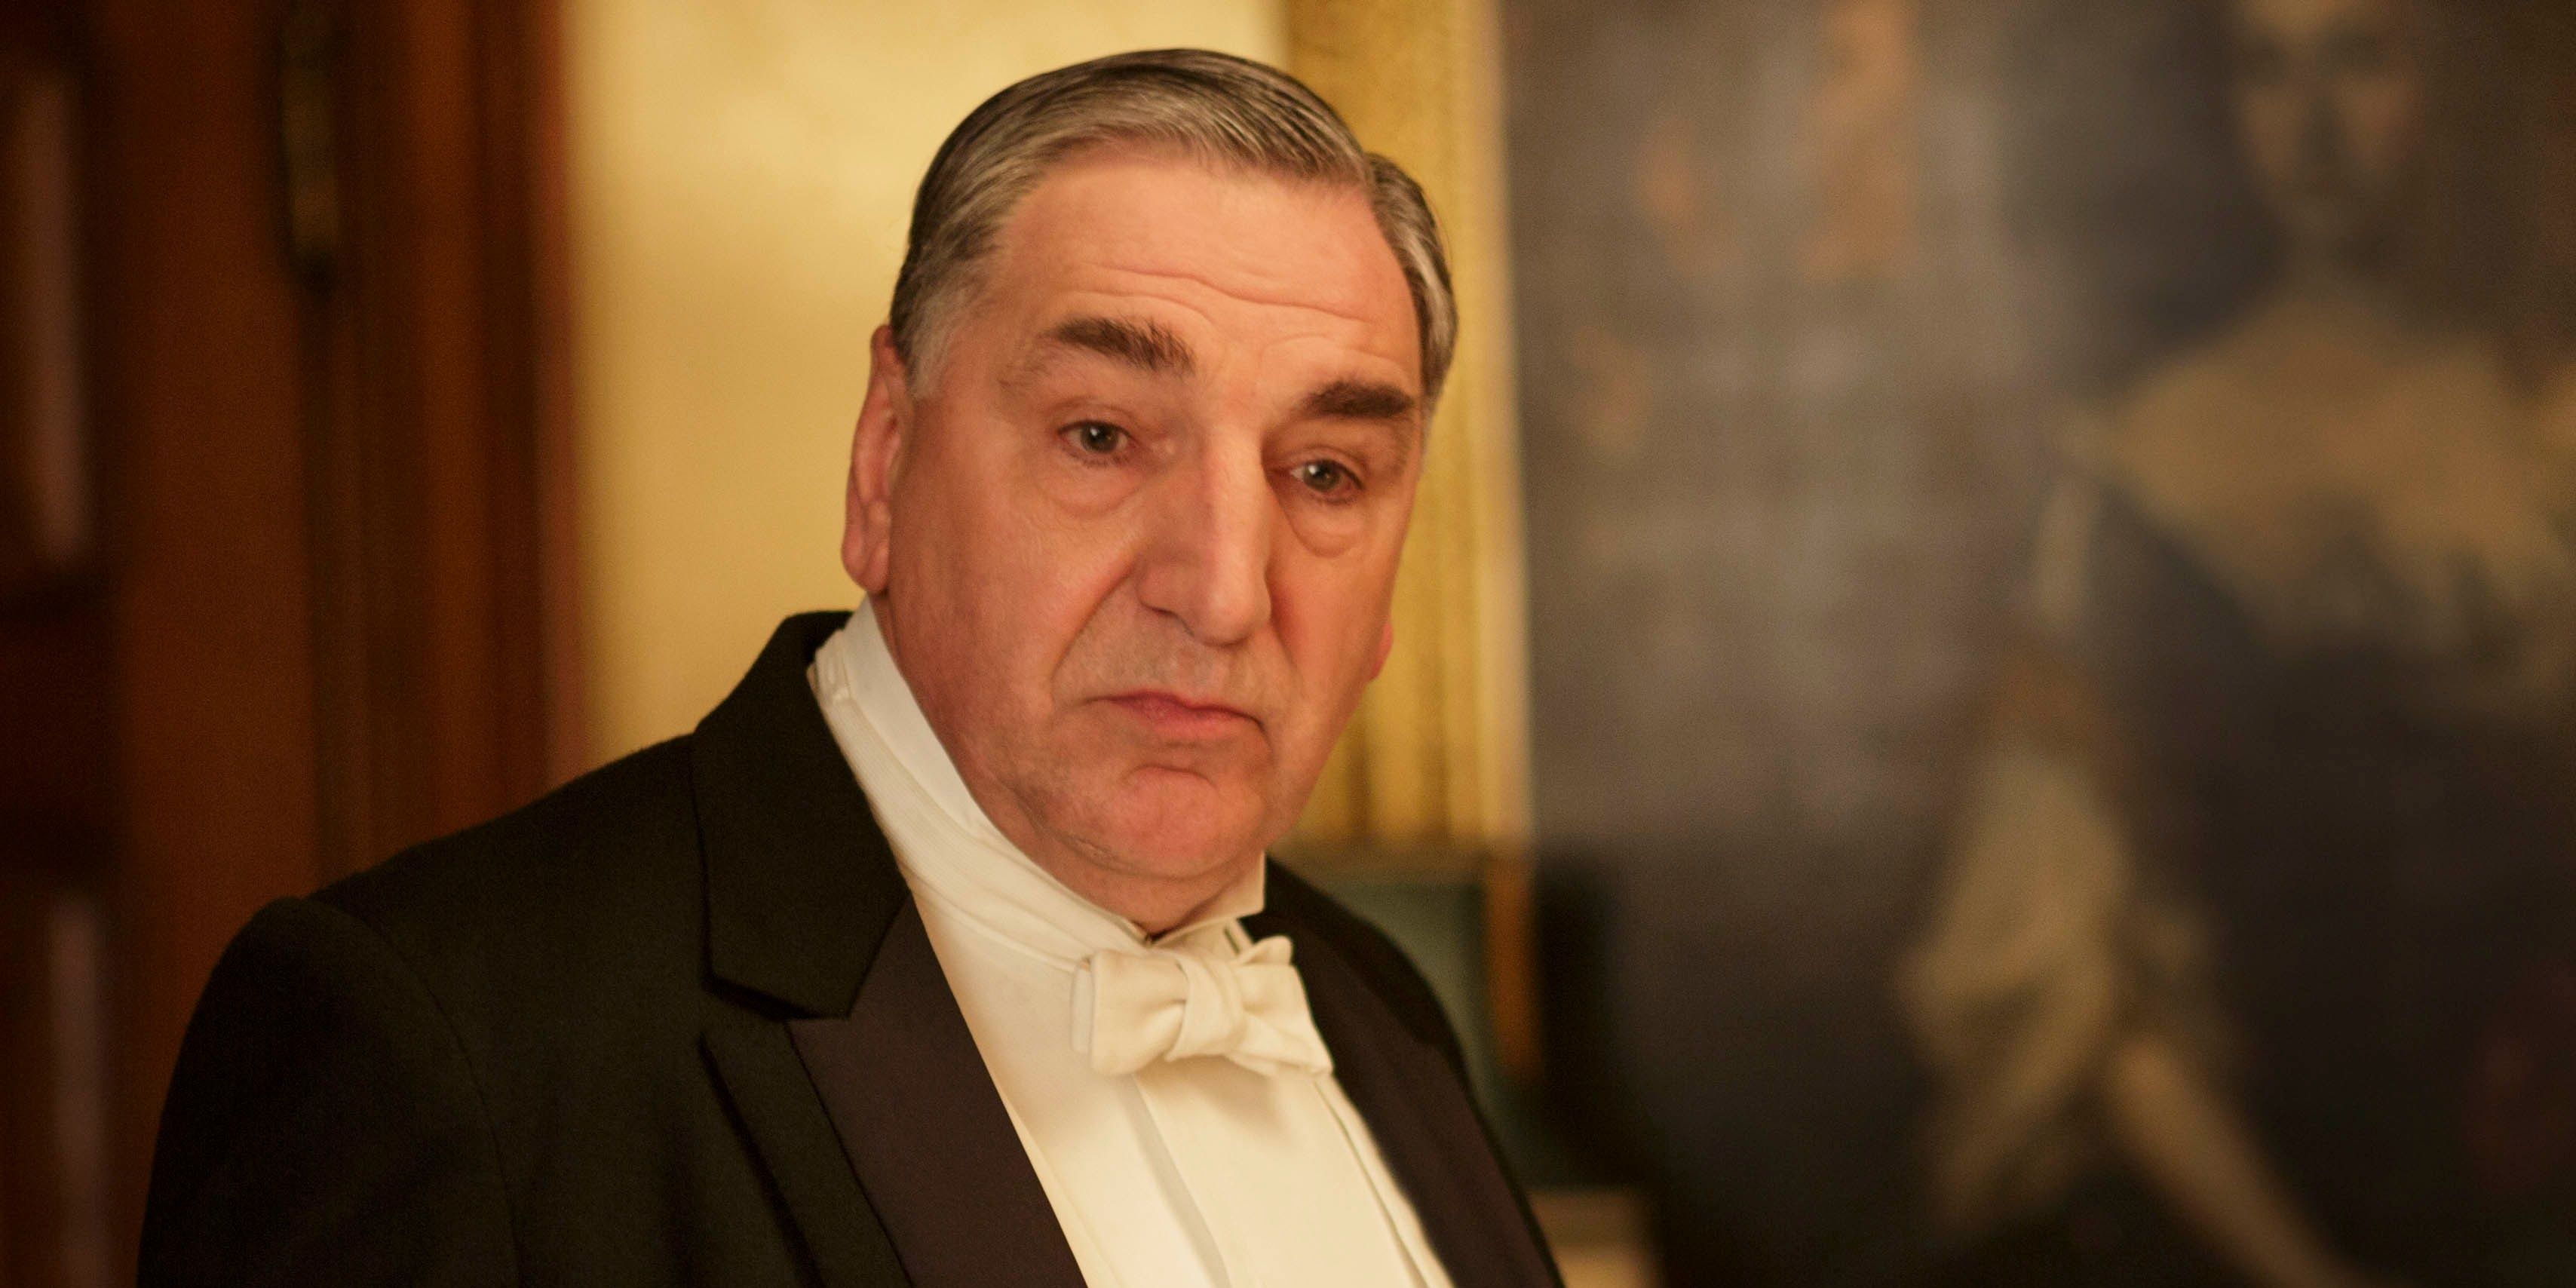 Carson at dinner in Downton Abbey.